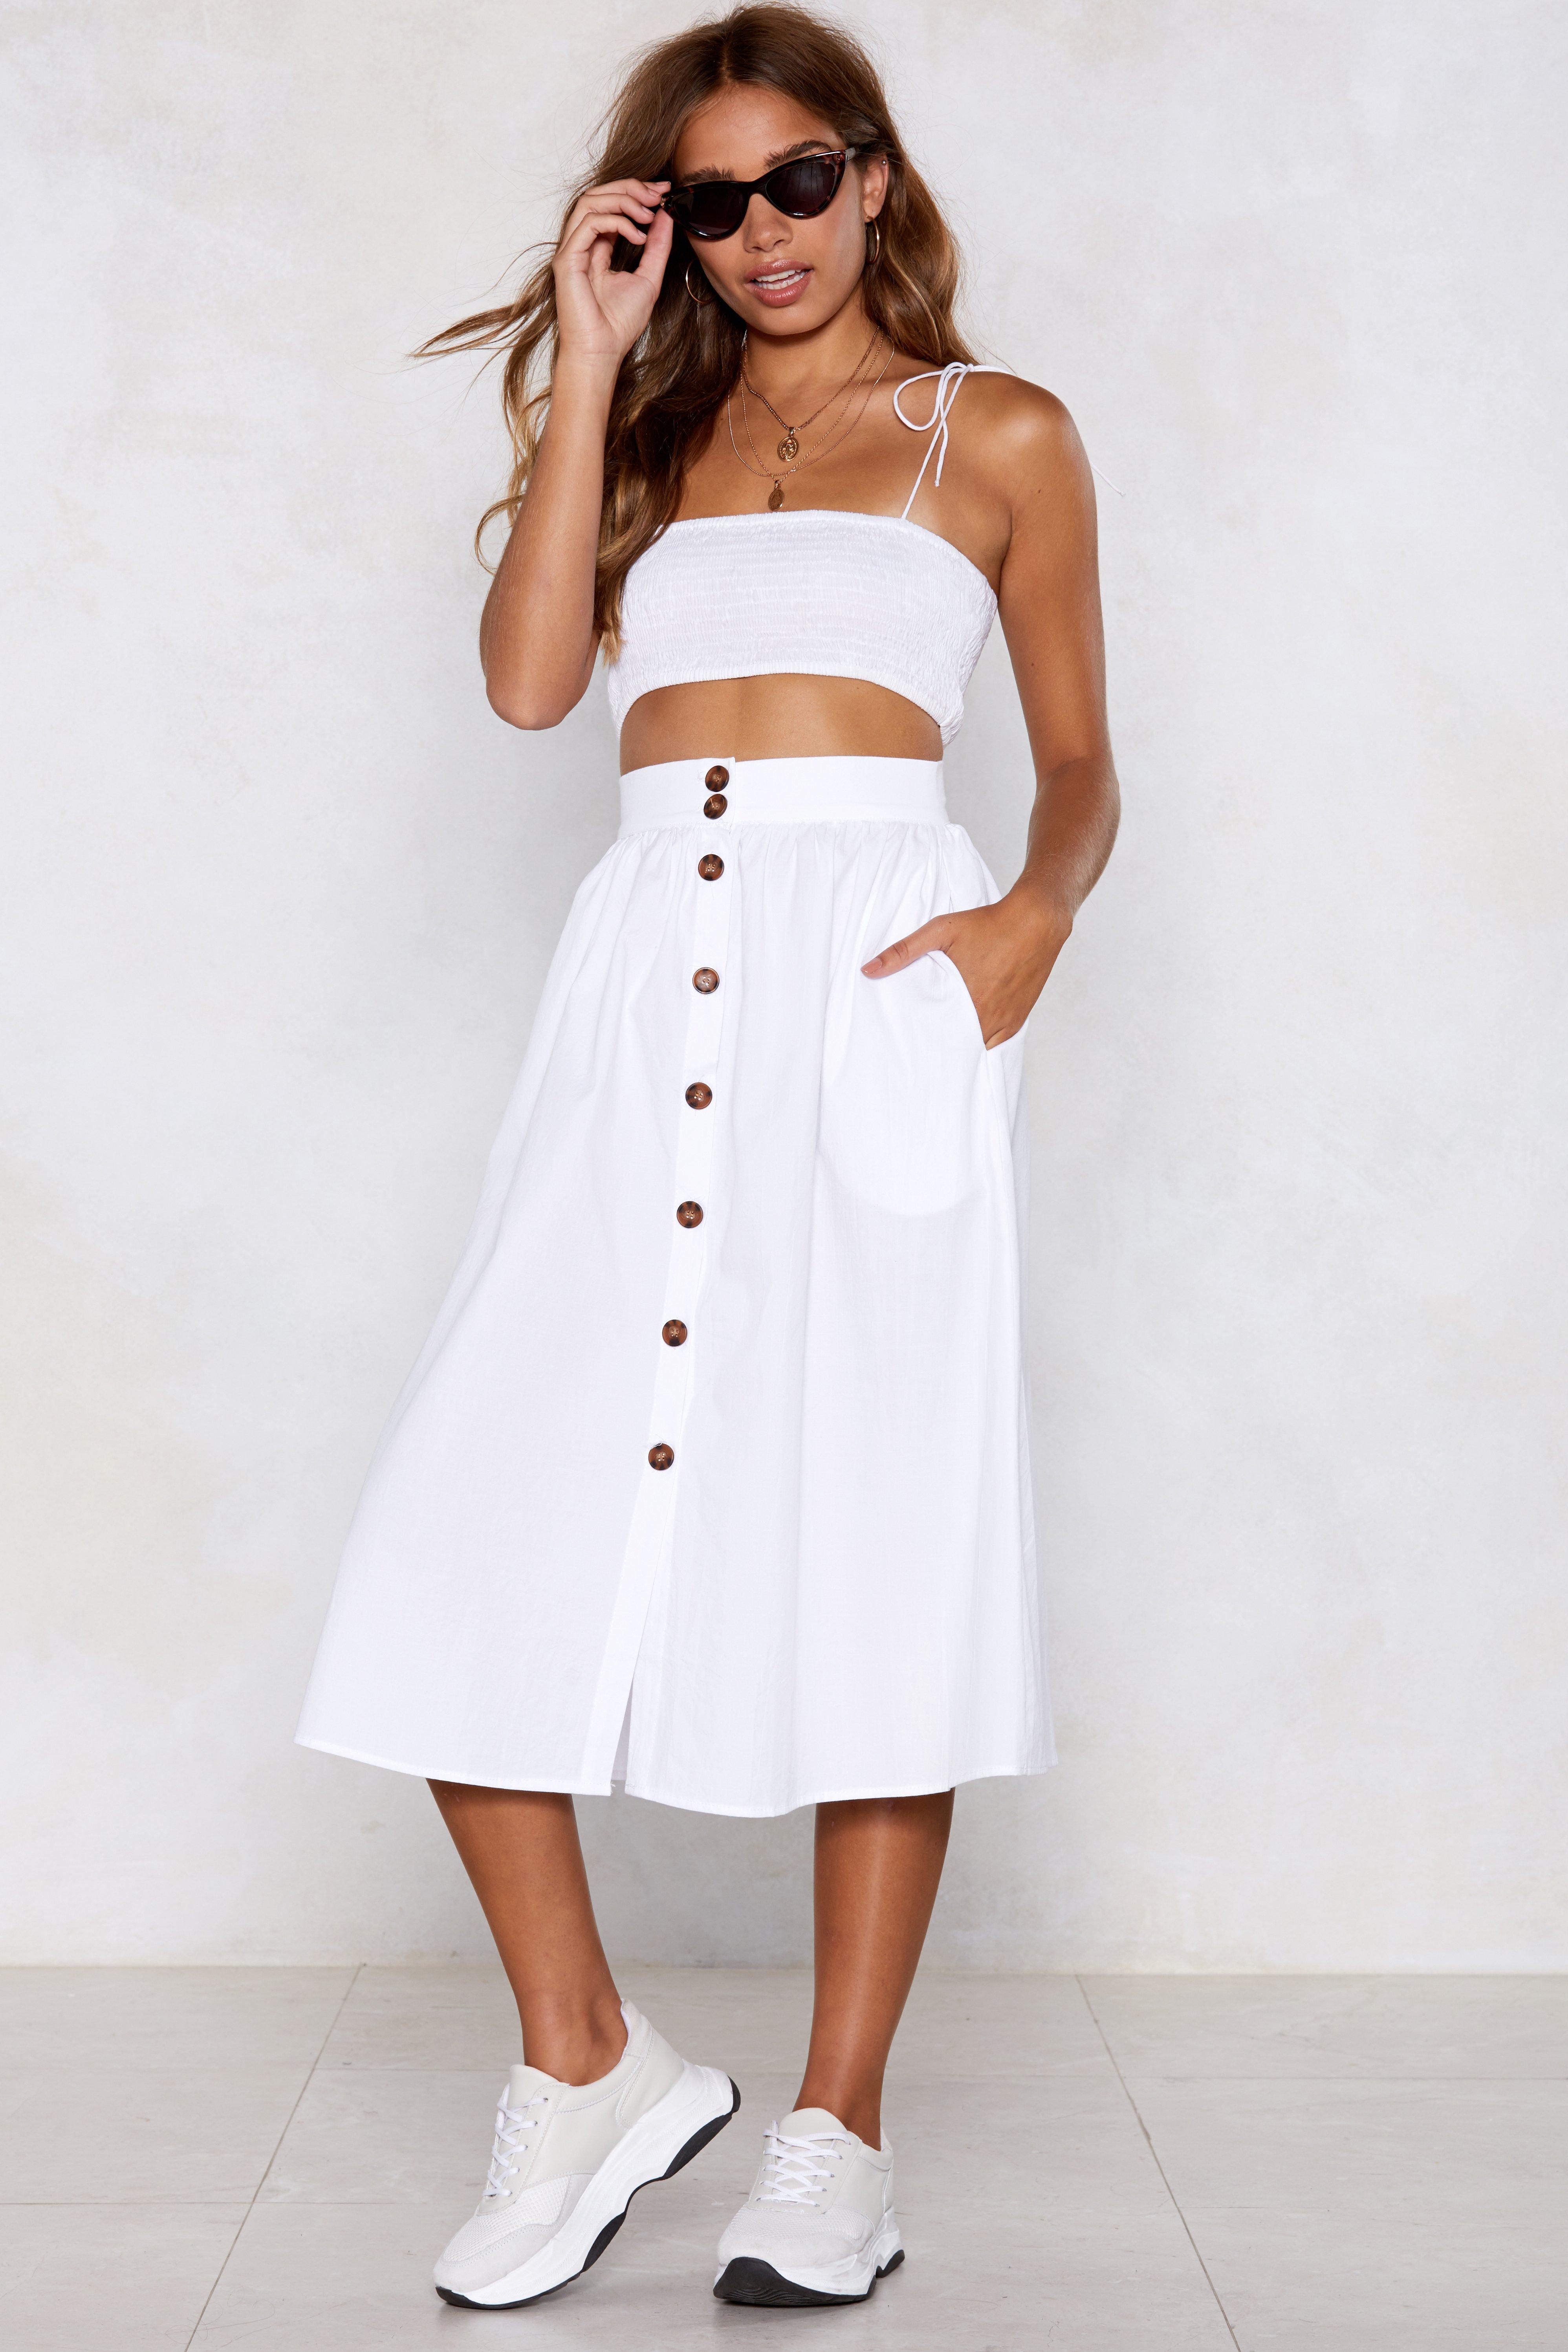 Button Up and At 'Em Midi Skirt | Nasty Gal